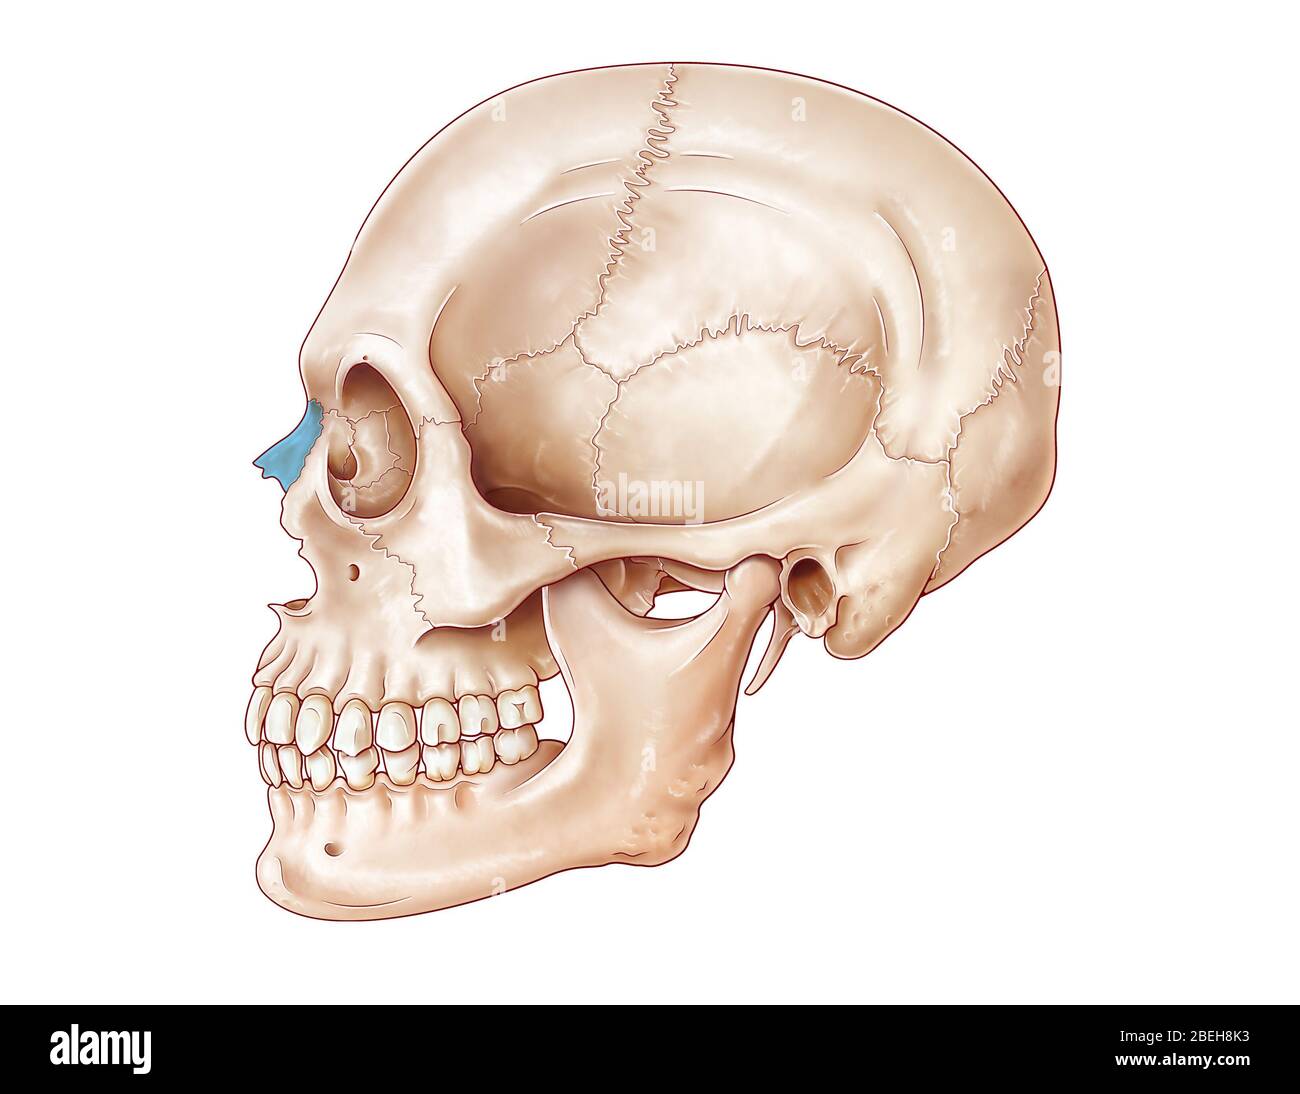 An illustration of the human skull from a lateral view, with the nasal